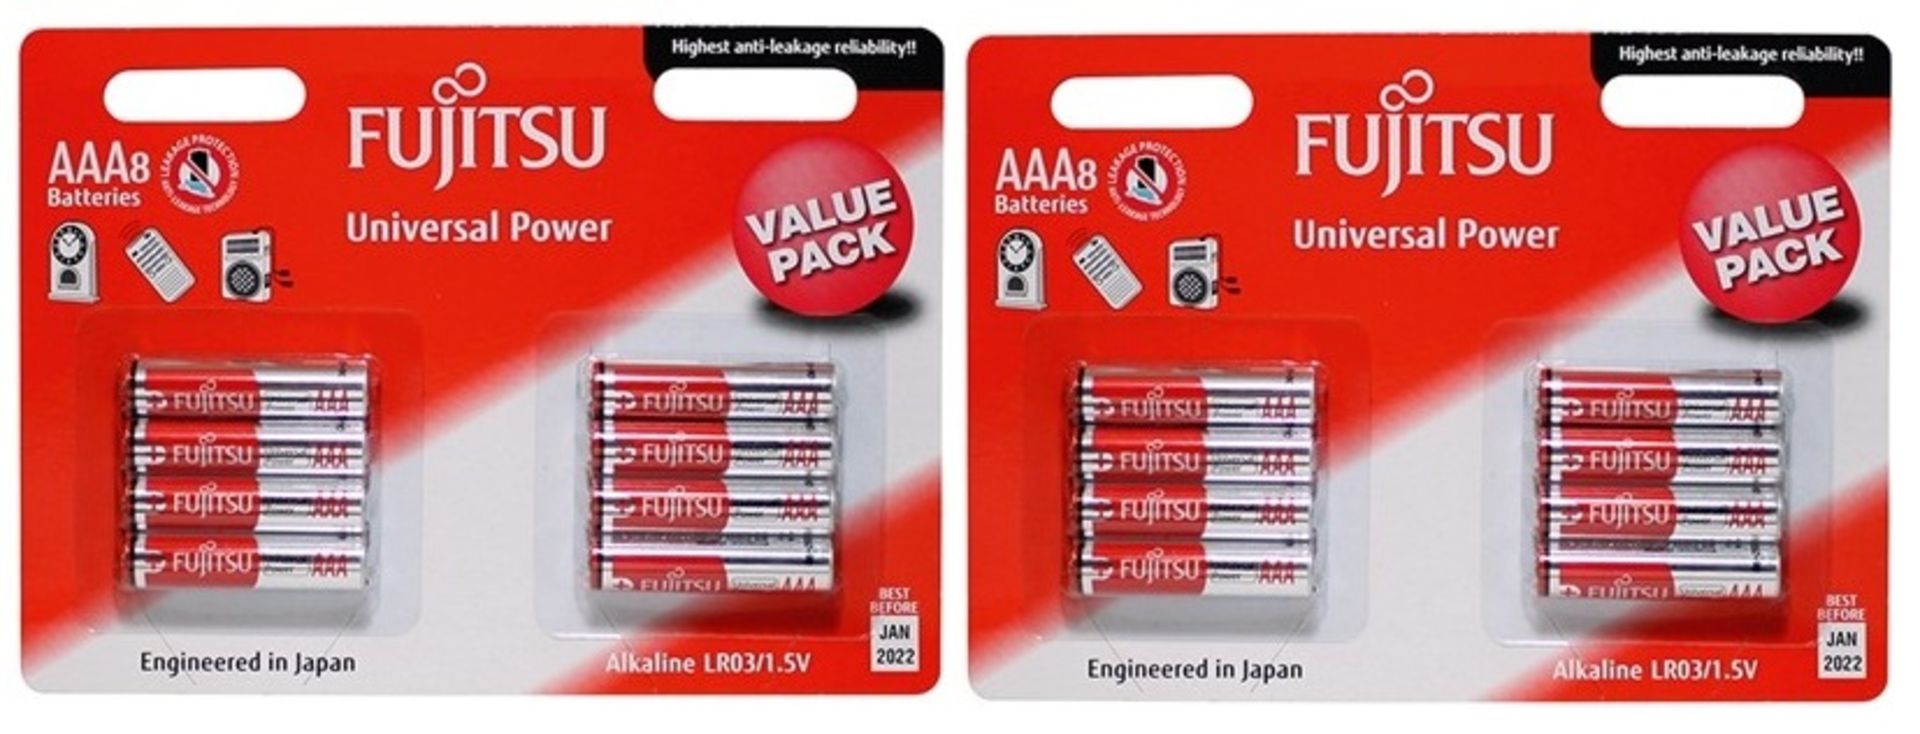 V Brand New Two Packs of Eight Fujitsu AAA Universal Power Batteries (16 In Total) Ebay Price £9.00